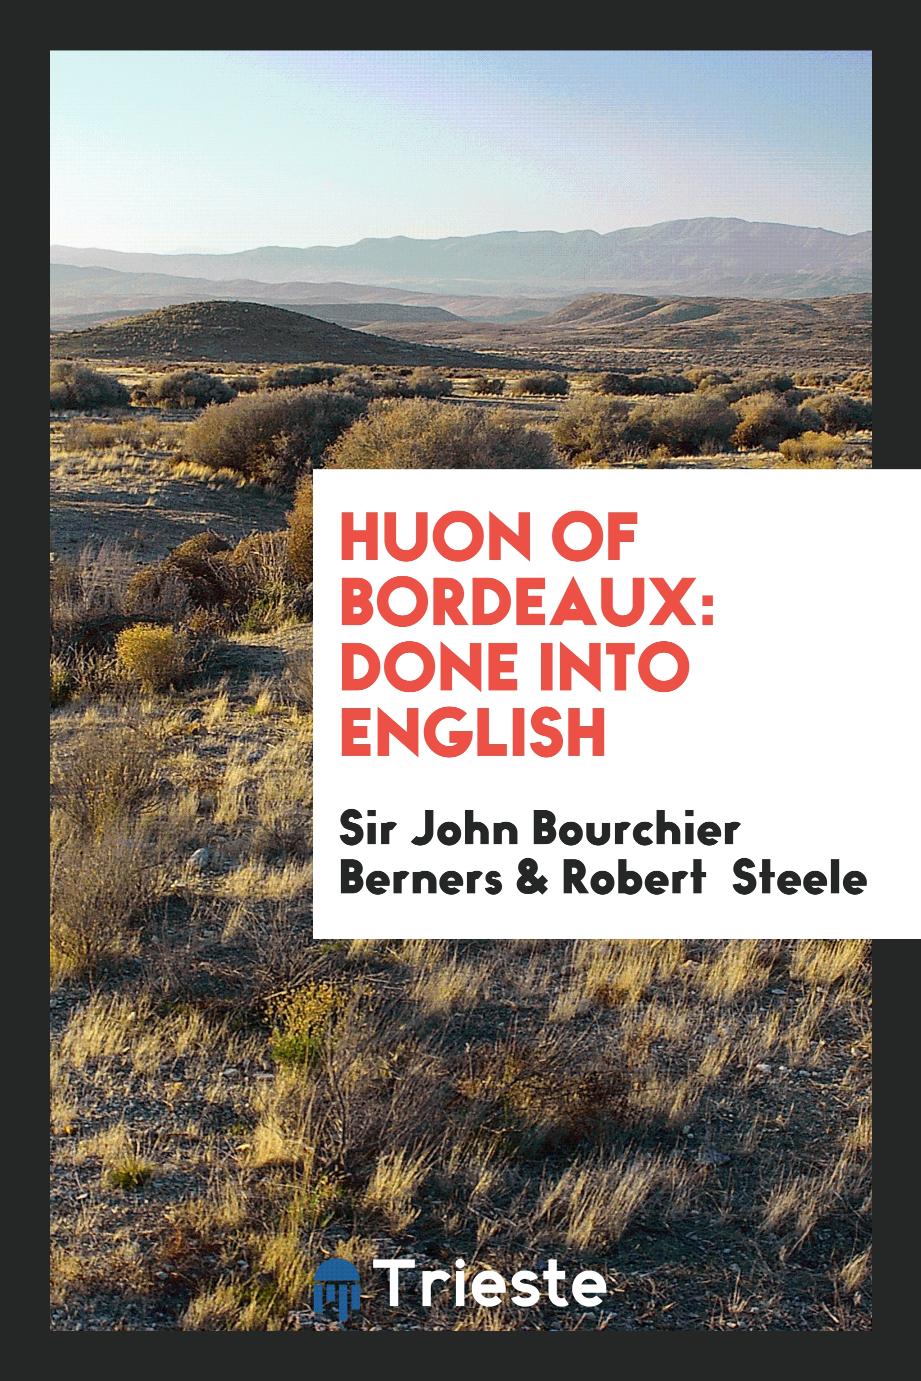 Huon of Bordeaux: Done into English